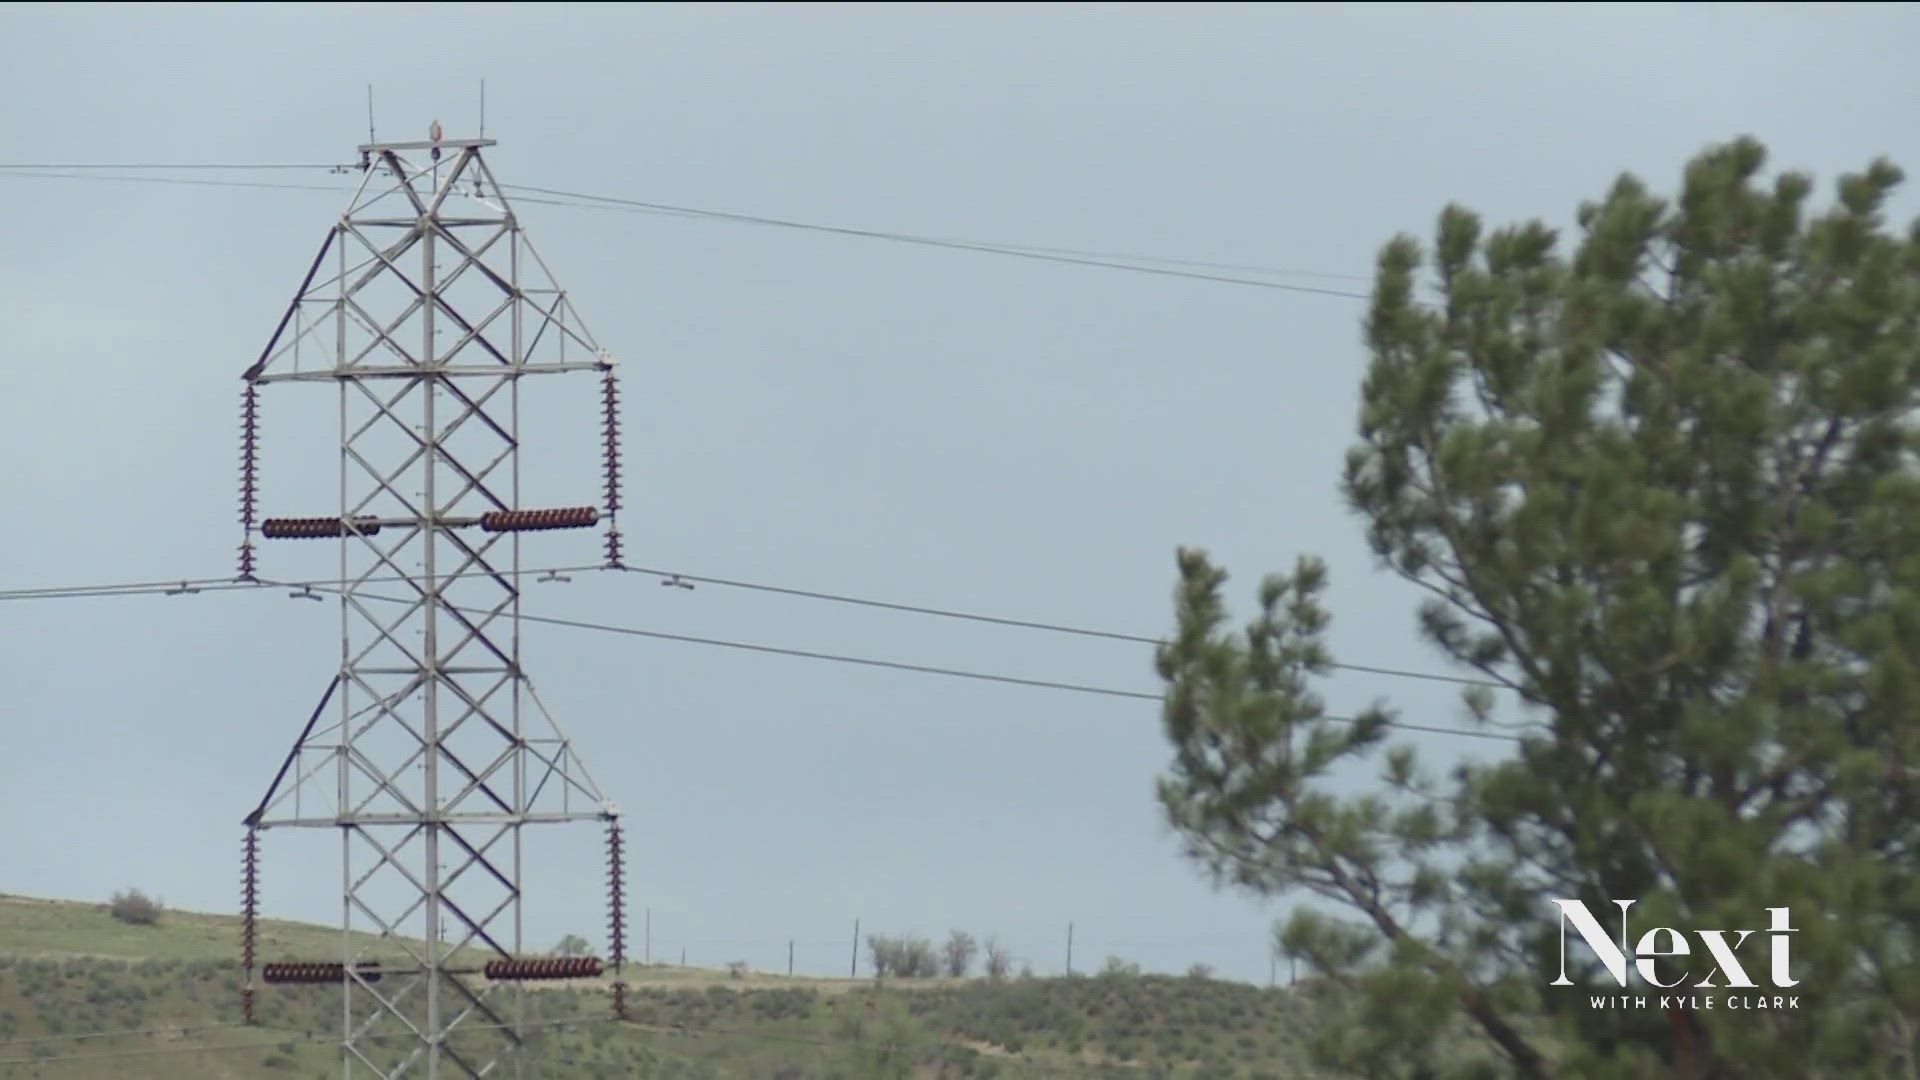 On Monday, the Colorado Public Utilities Commission held a two-hour hearing to hear from Xcel about its decision to shut off power and what it will do in the future.